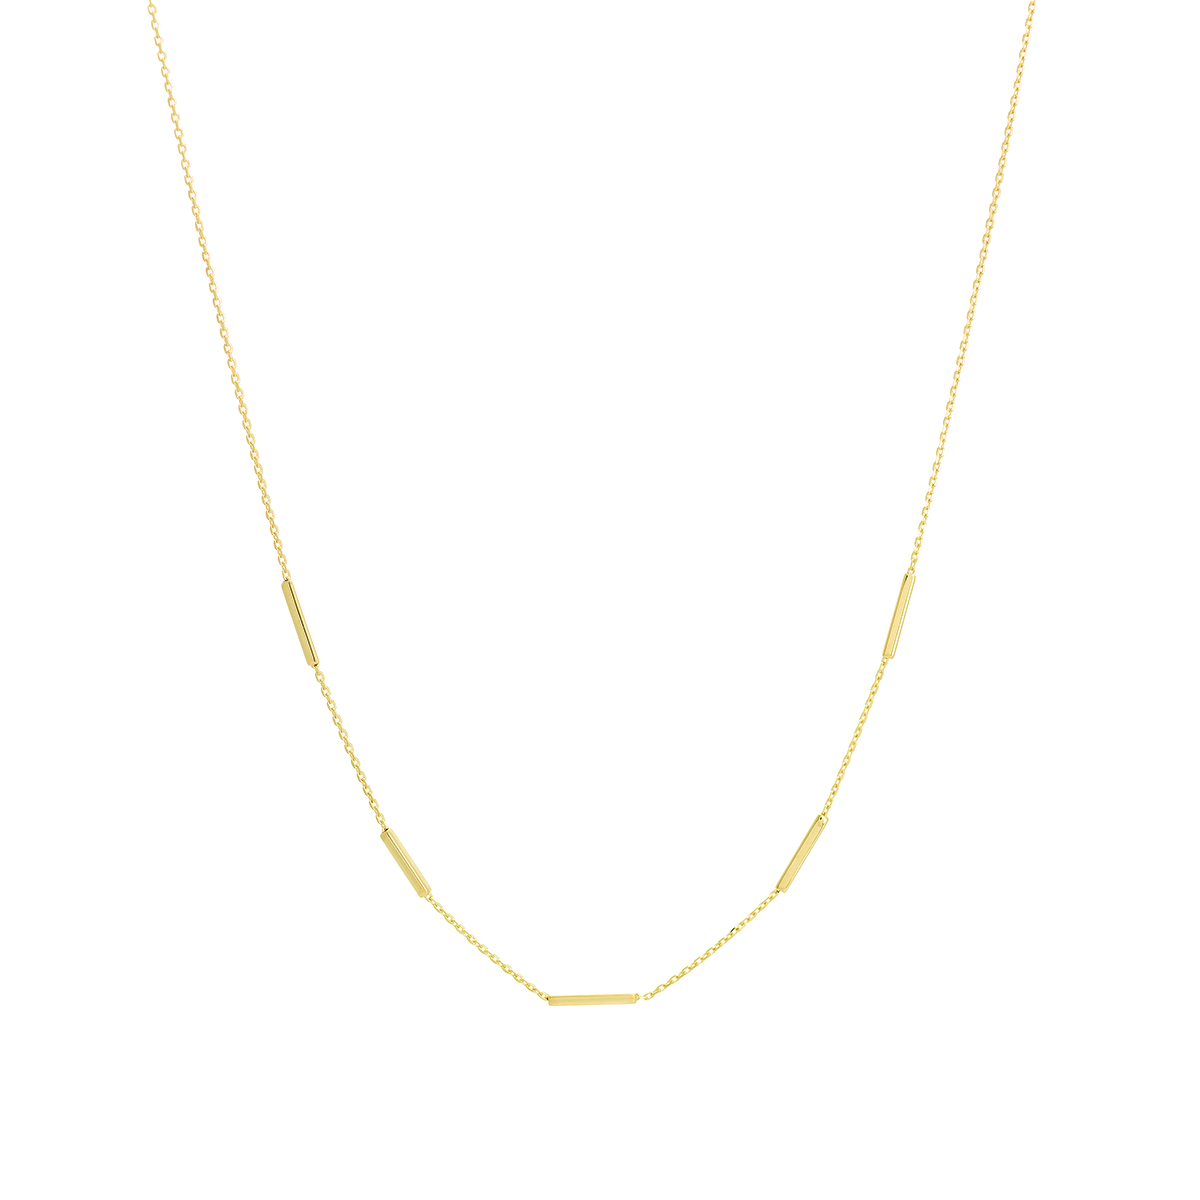 5 Station Bar Necklace in Yellow Gold, 16